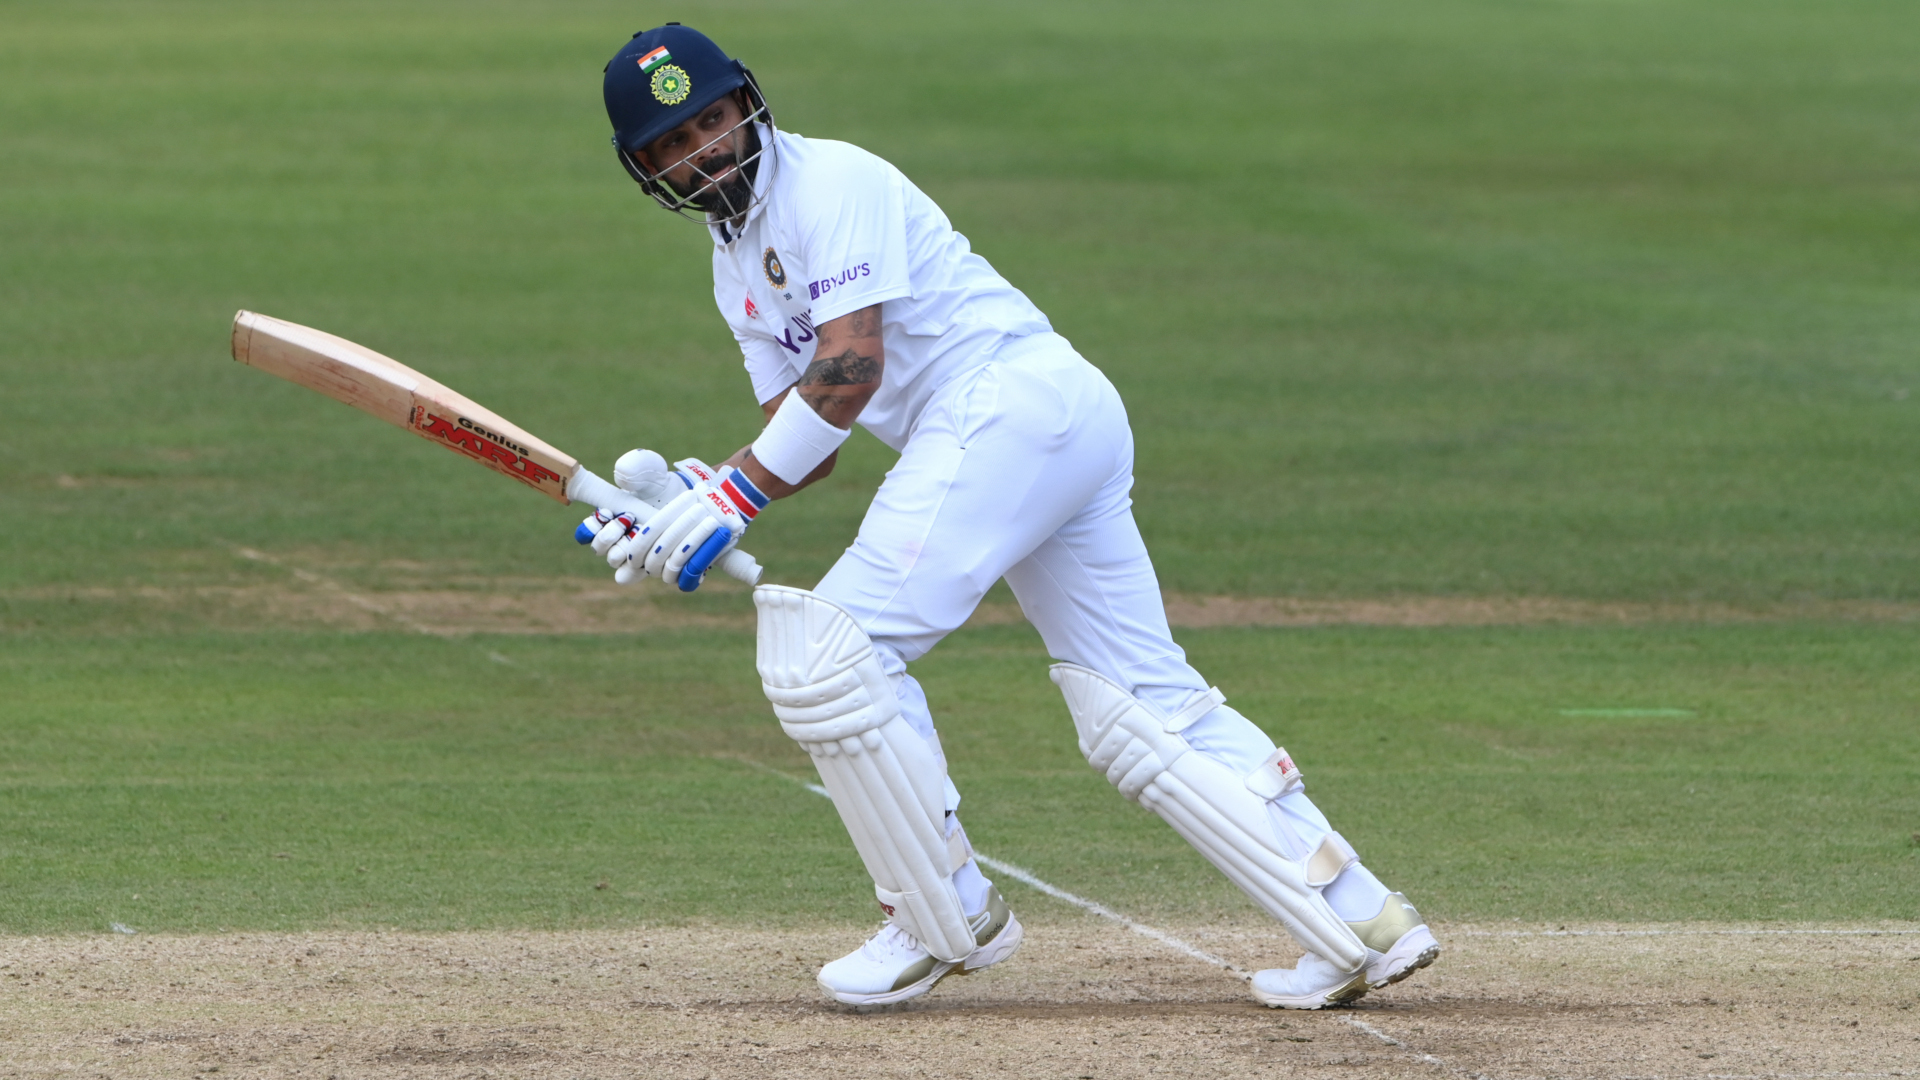 India vs Sri Lanka live stream and how to watch the 1st Test cricket online What Hi-Fi?